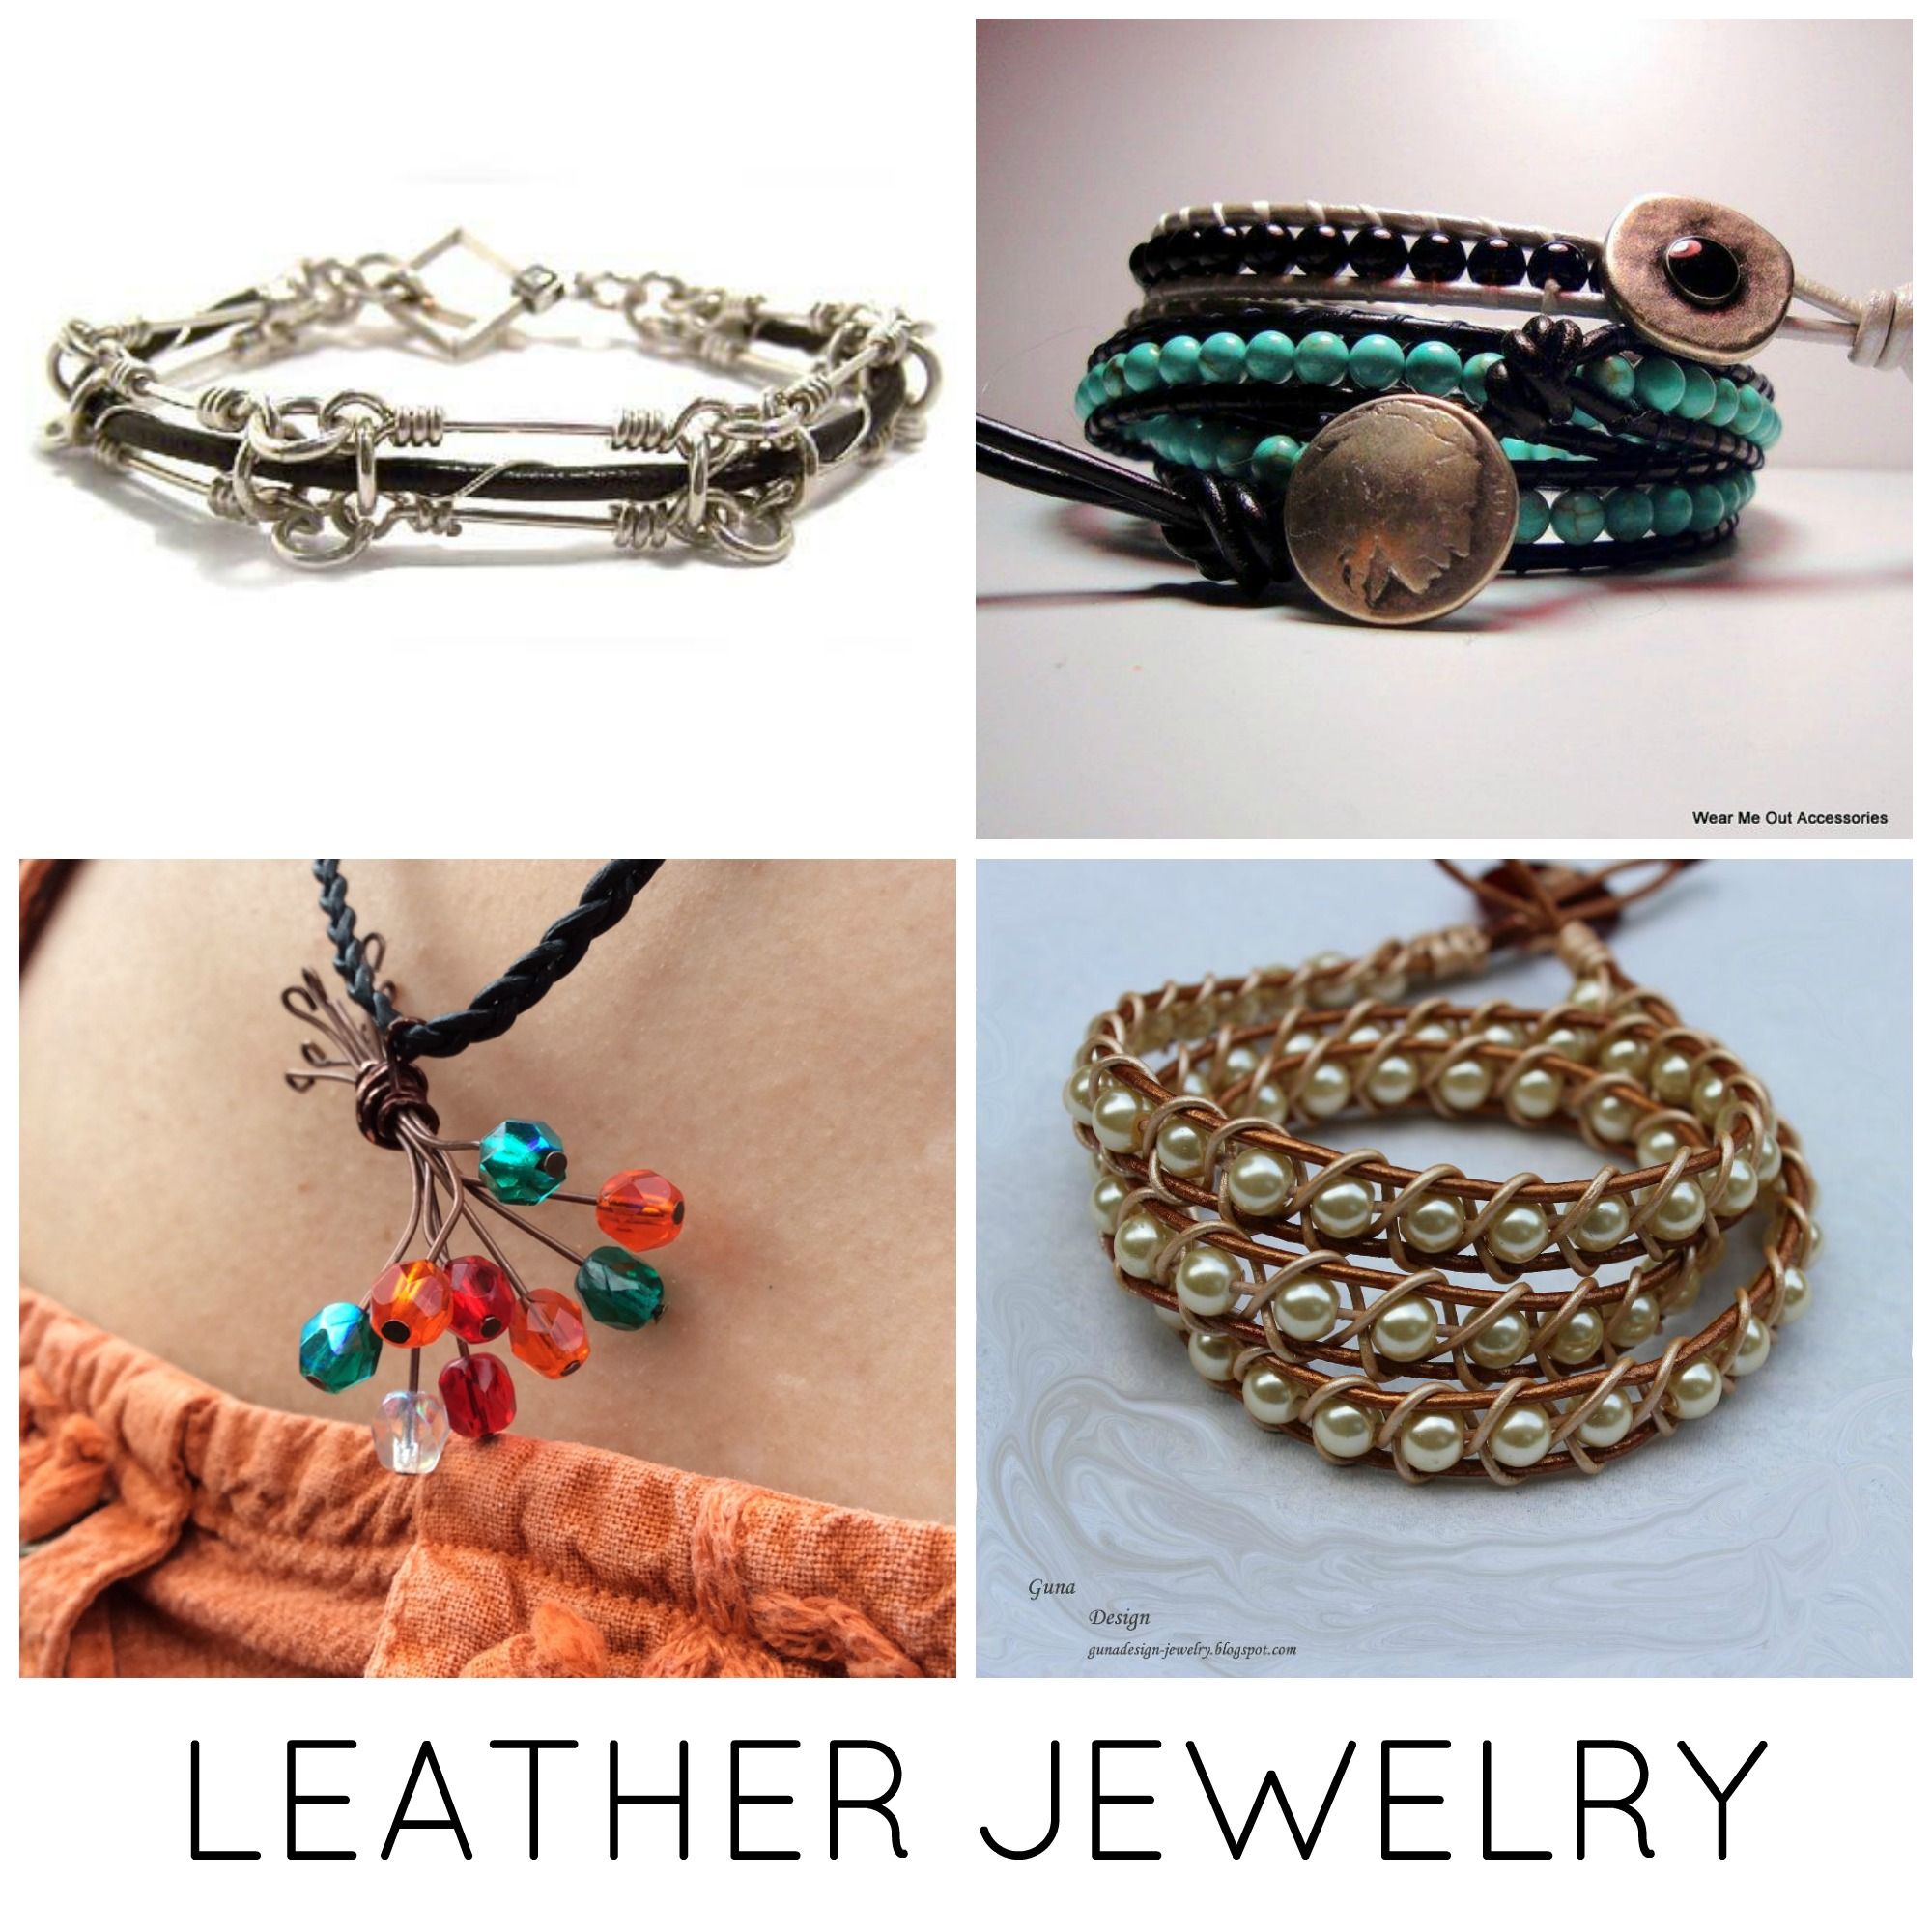 Leather jewelry making ideas